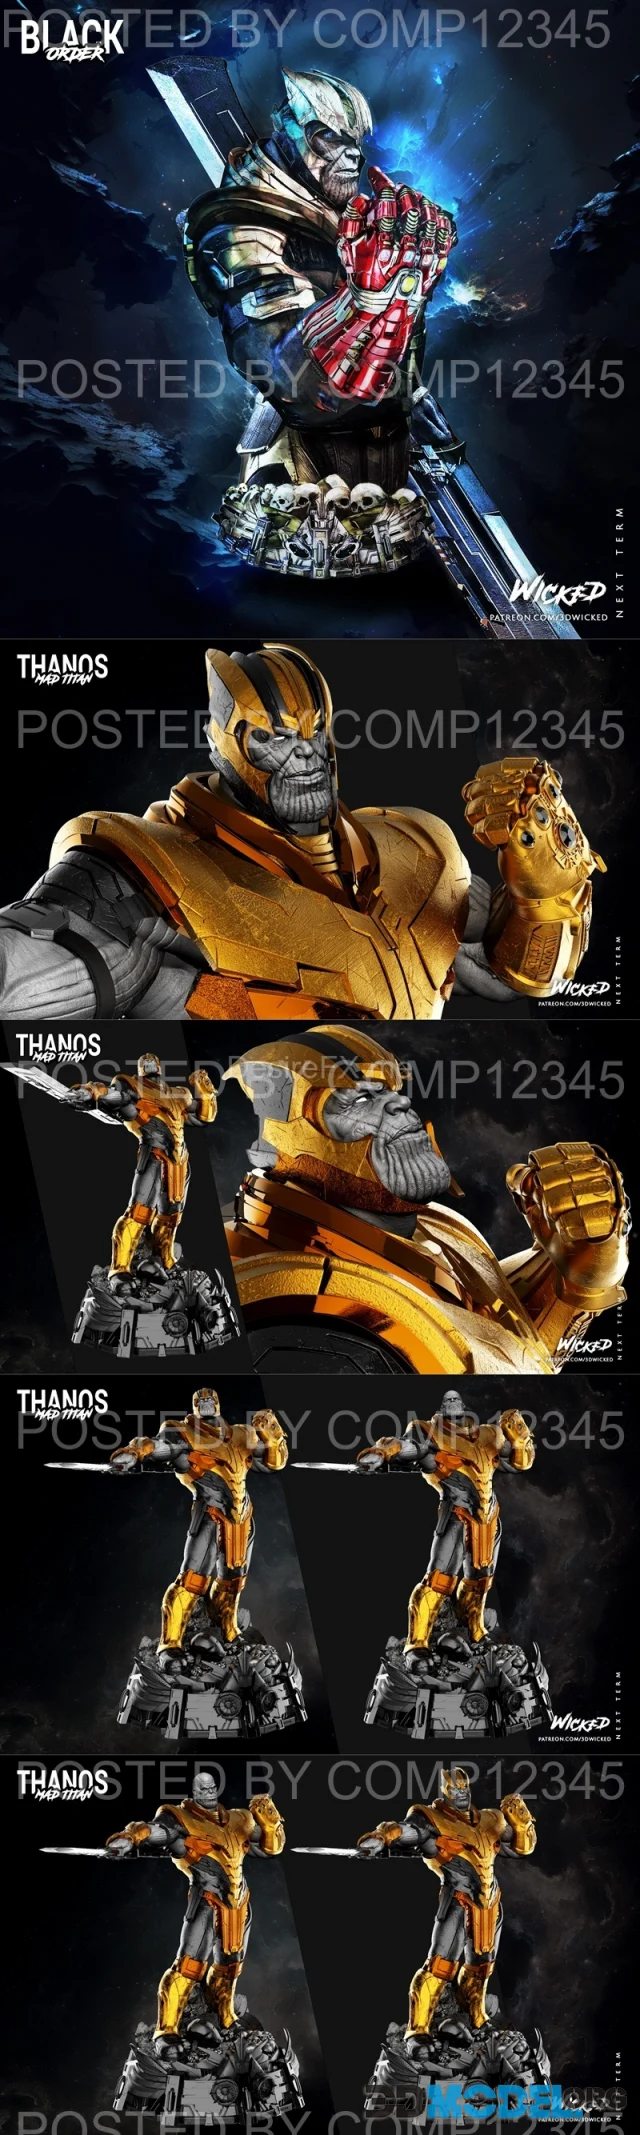 WICKED - Thanos Statue and Bust – Printable